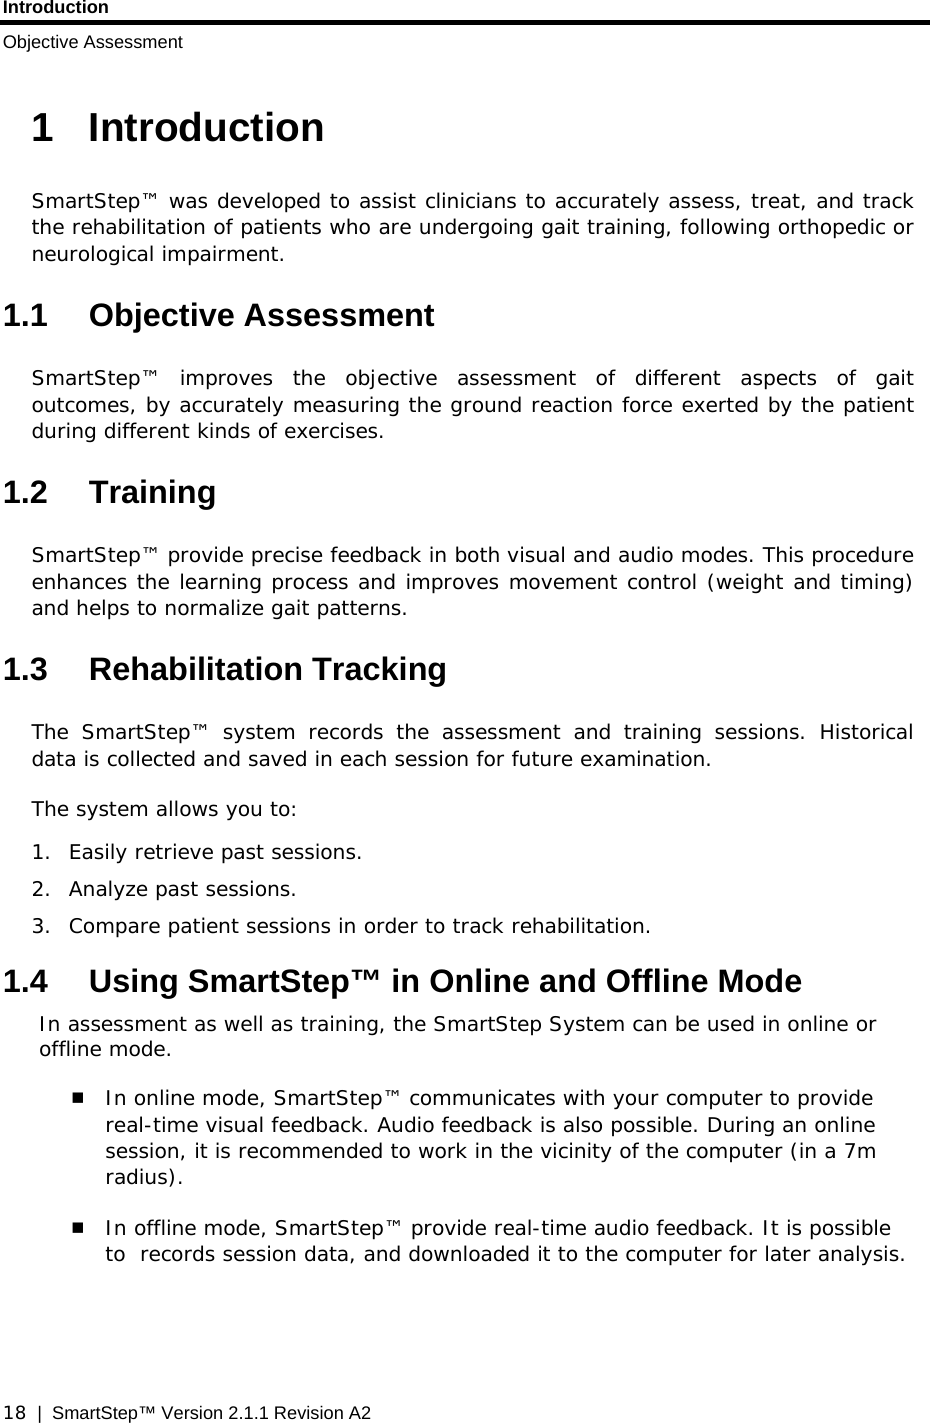 Introduction Objective Assessment  18  |  SmartStep™ Version 2.1.1 Revision A2 1 Introduction SmartStep™ was developed to assist clinicians to accurately assess, treat, and track the rehabilitation of patients who are undergoing gait training, following orthopedic or neurological impairment. 1.1 Objective Assessment SmartStep™ improves the objective assessment of different aspects of gait outcomes, by accurately measuring the ground reaction force exerted by the patient during different kinds of exercises. 1.2 Training SmartStep™ provide precise feedback in both visual and audio modes. This procedure enhances the learning process and improves movement control (weight and timing) and helps to normalize gait patterns. 1.3 Rehabilitation Tracking The SmartStep™ system records the assessment and training sessions. Historical data is collected and saved in each session for future examination. The system allows you to: 1.  Easily retrieve past sessions. 2. Analyze past sessions. 3.  Compare patient sessions in order to track rehabilitation. 1.4  Using SmartStep™ in Online and Offline Mode In assessment as well as training, the SmartStep System can be used in online or offline mode.  In online mode, SmartStep™ communicates with your computer to provide real-time visual feedback. Audio feedback is also possible. During an online session, it is recommended to work in the vicinity of the computer (in a 7m radius).   In offline mode, SmartStep™ provide real-time audio feedback. It is possible to  records session data, and downloaded it to the computer for later analysis. 